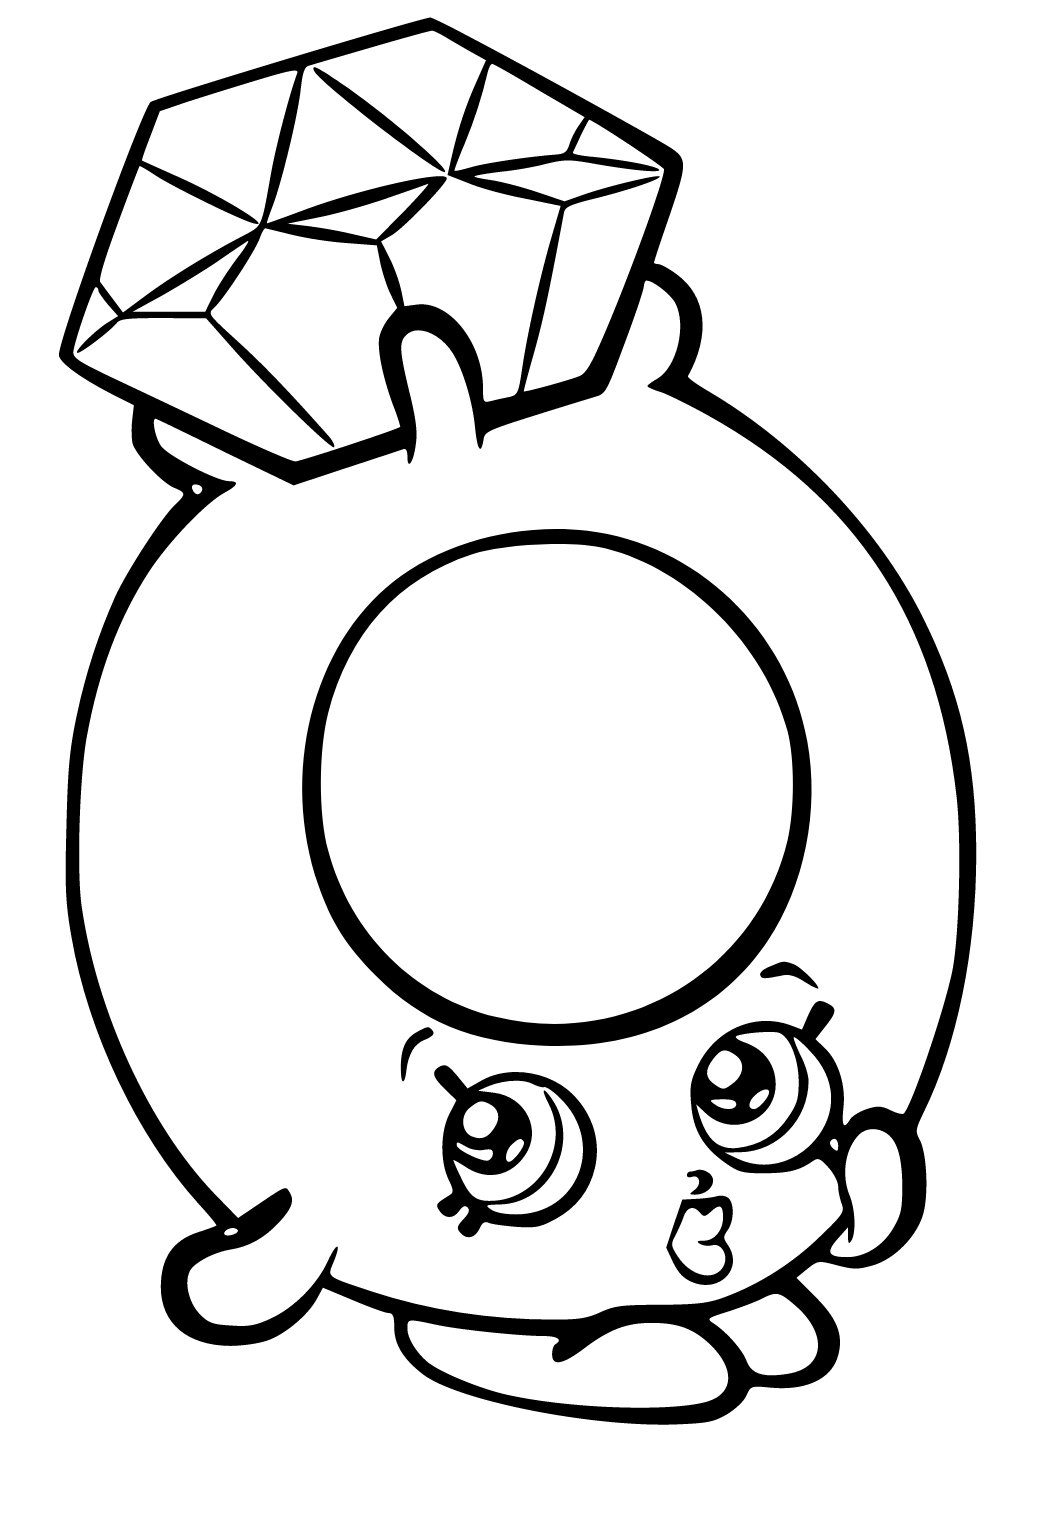 Rings Coloring Page - Get Coloring Pages